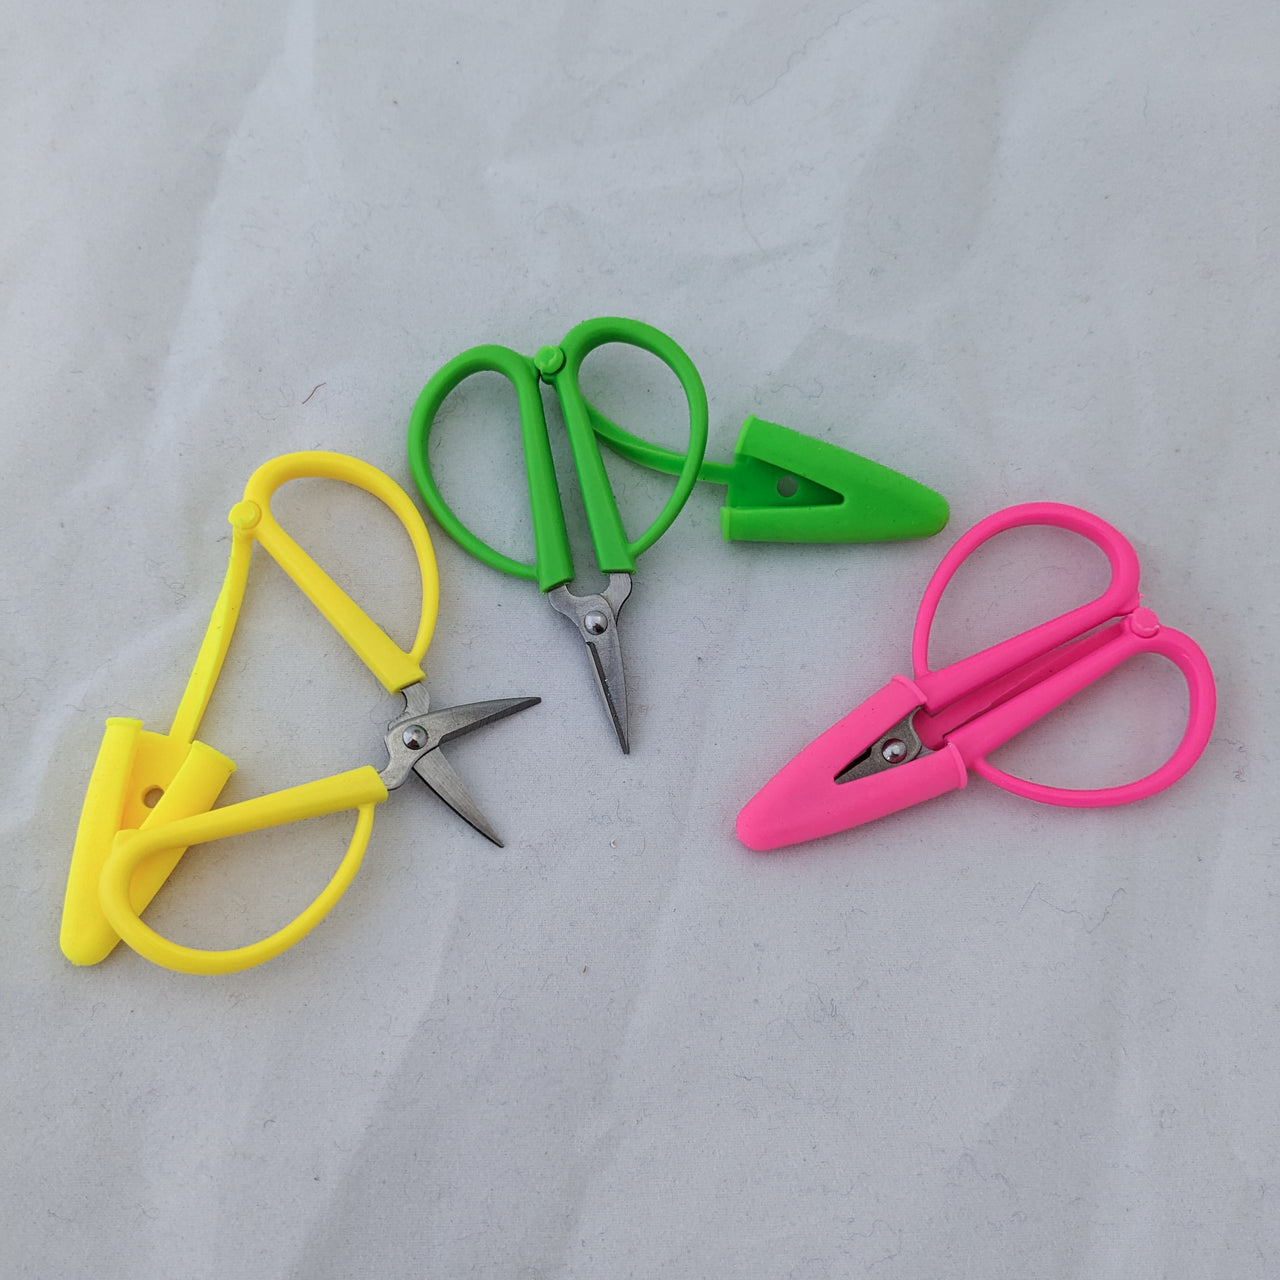 Mini super snips tiny scissors with sleeve shown covered, with the cover off, and open. Colors are neon yellow, green, and pink.